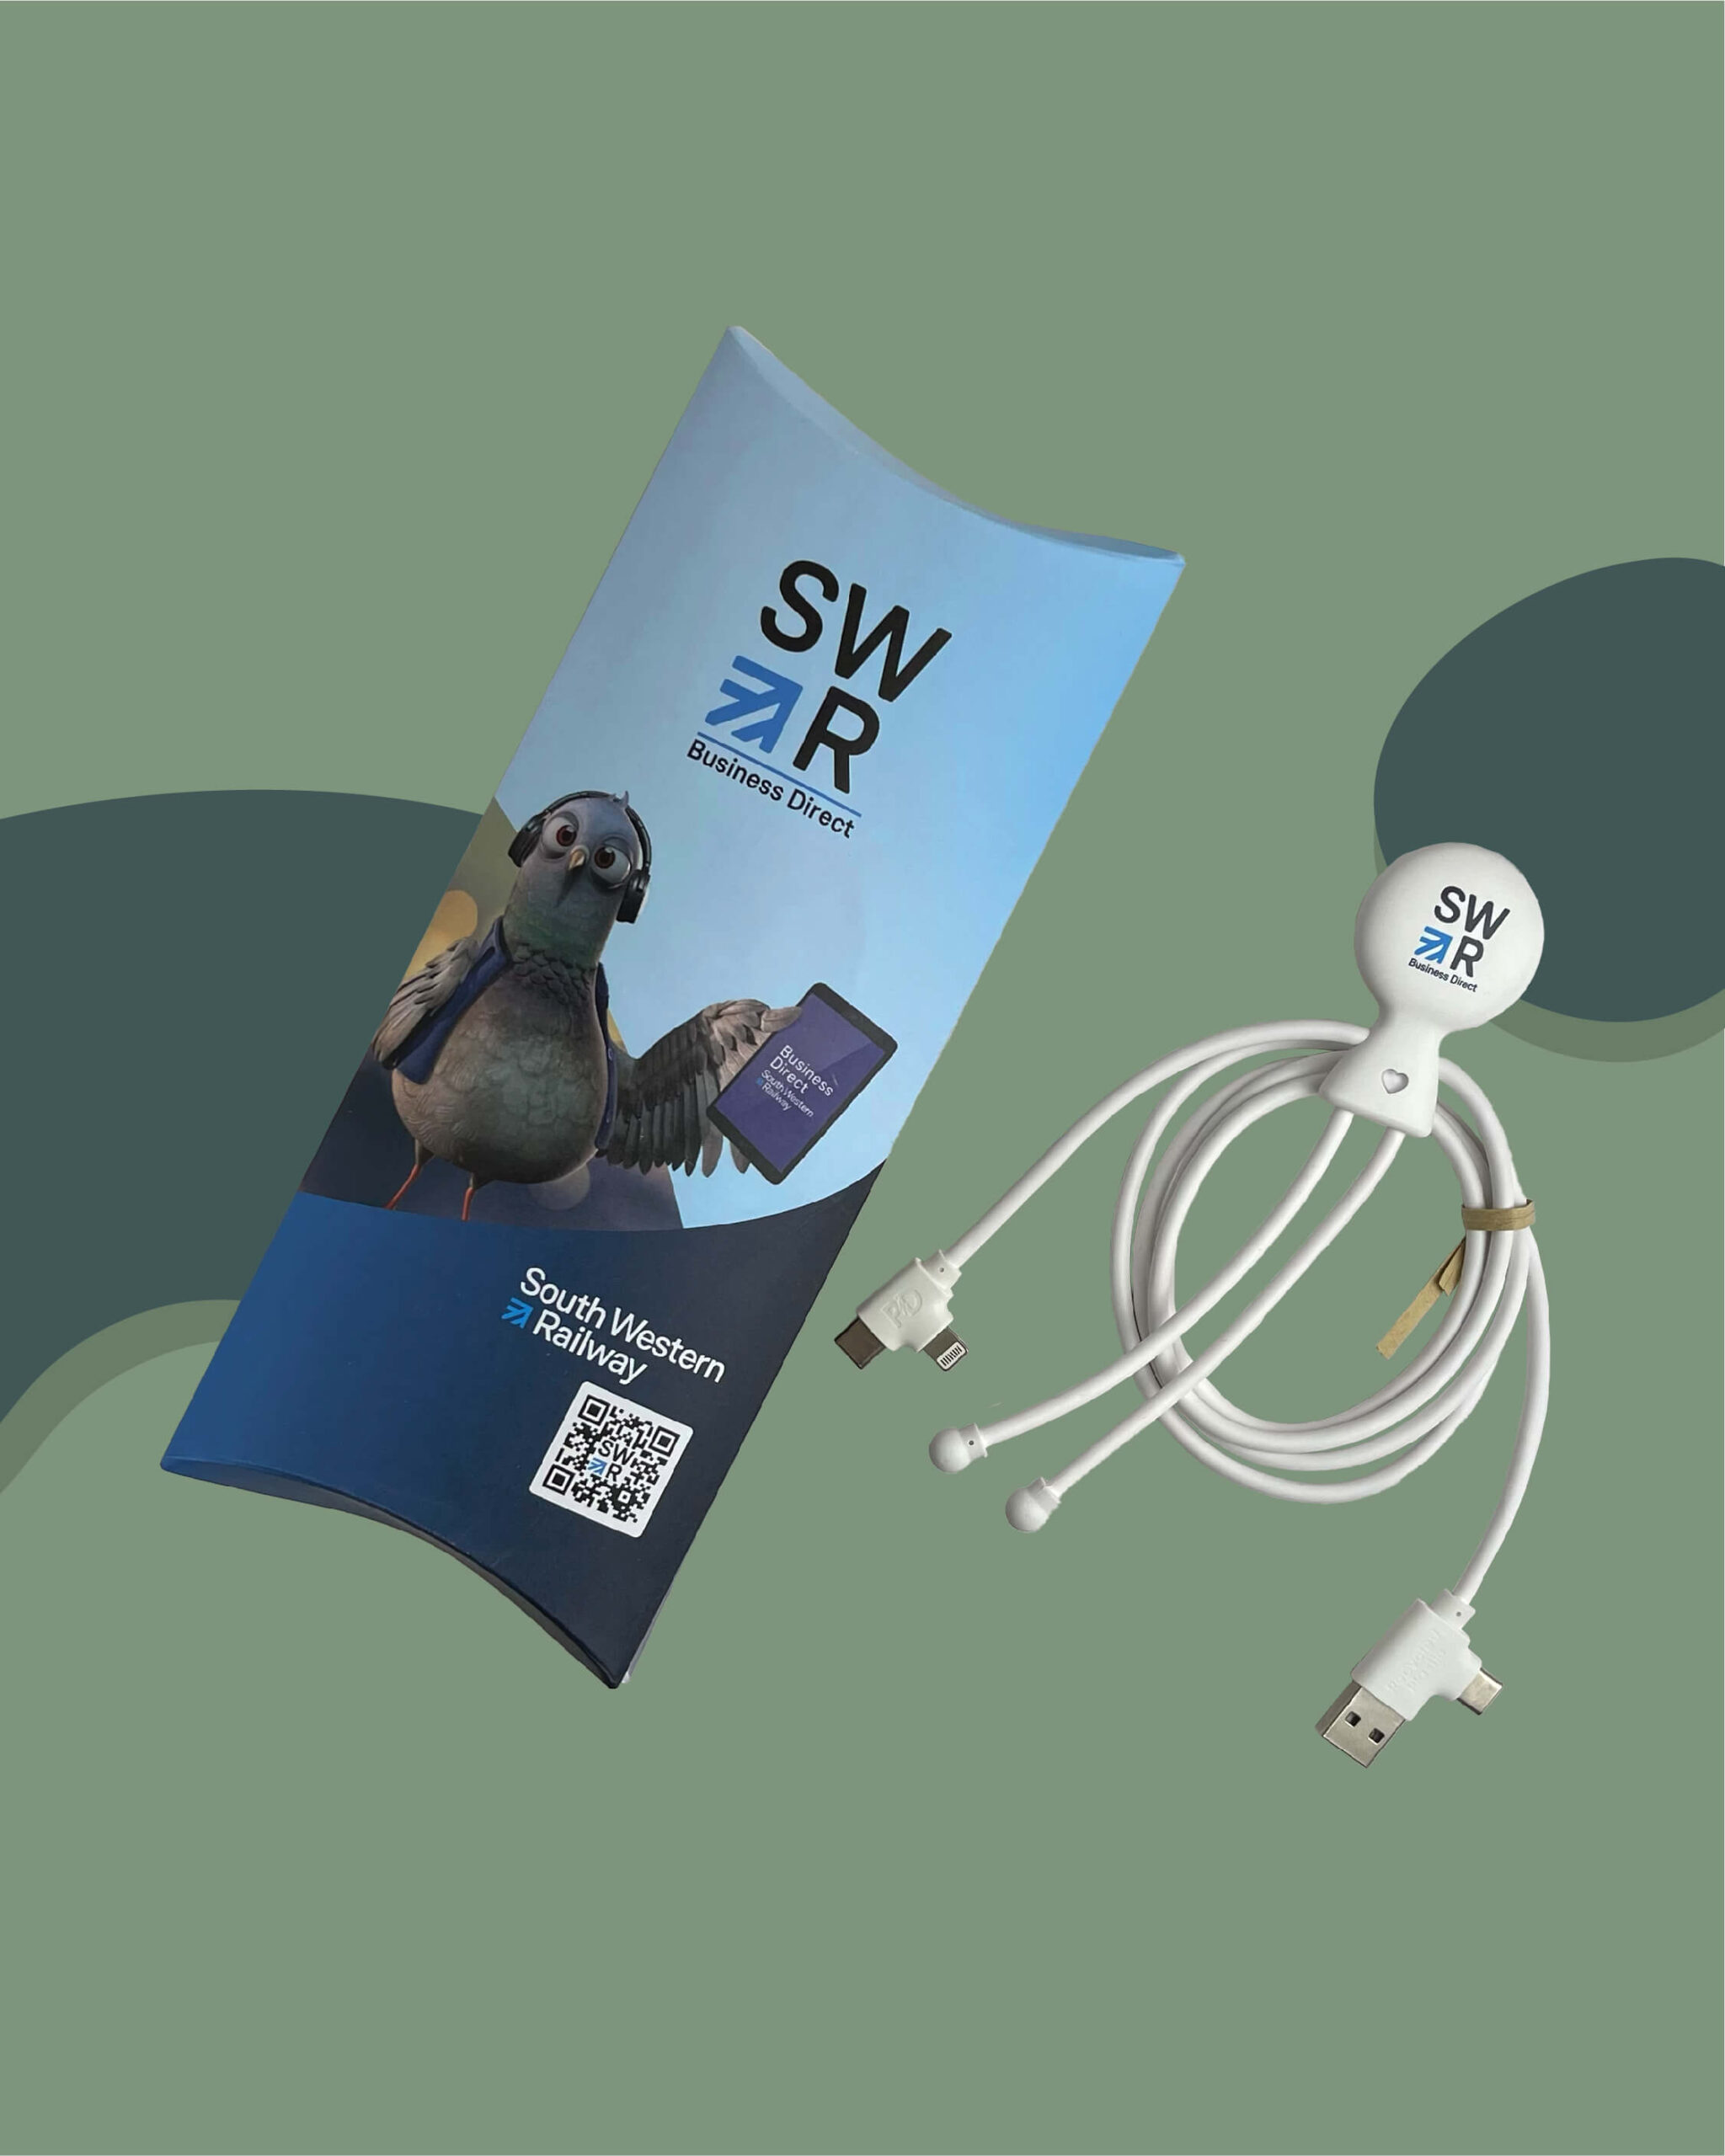 swr-promo-business-travel-gifts-by-project-merchandise